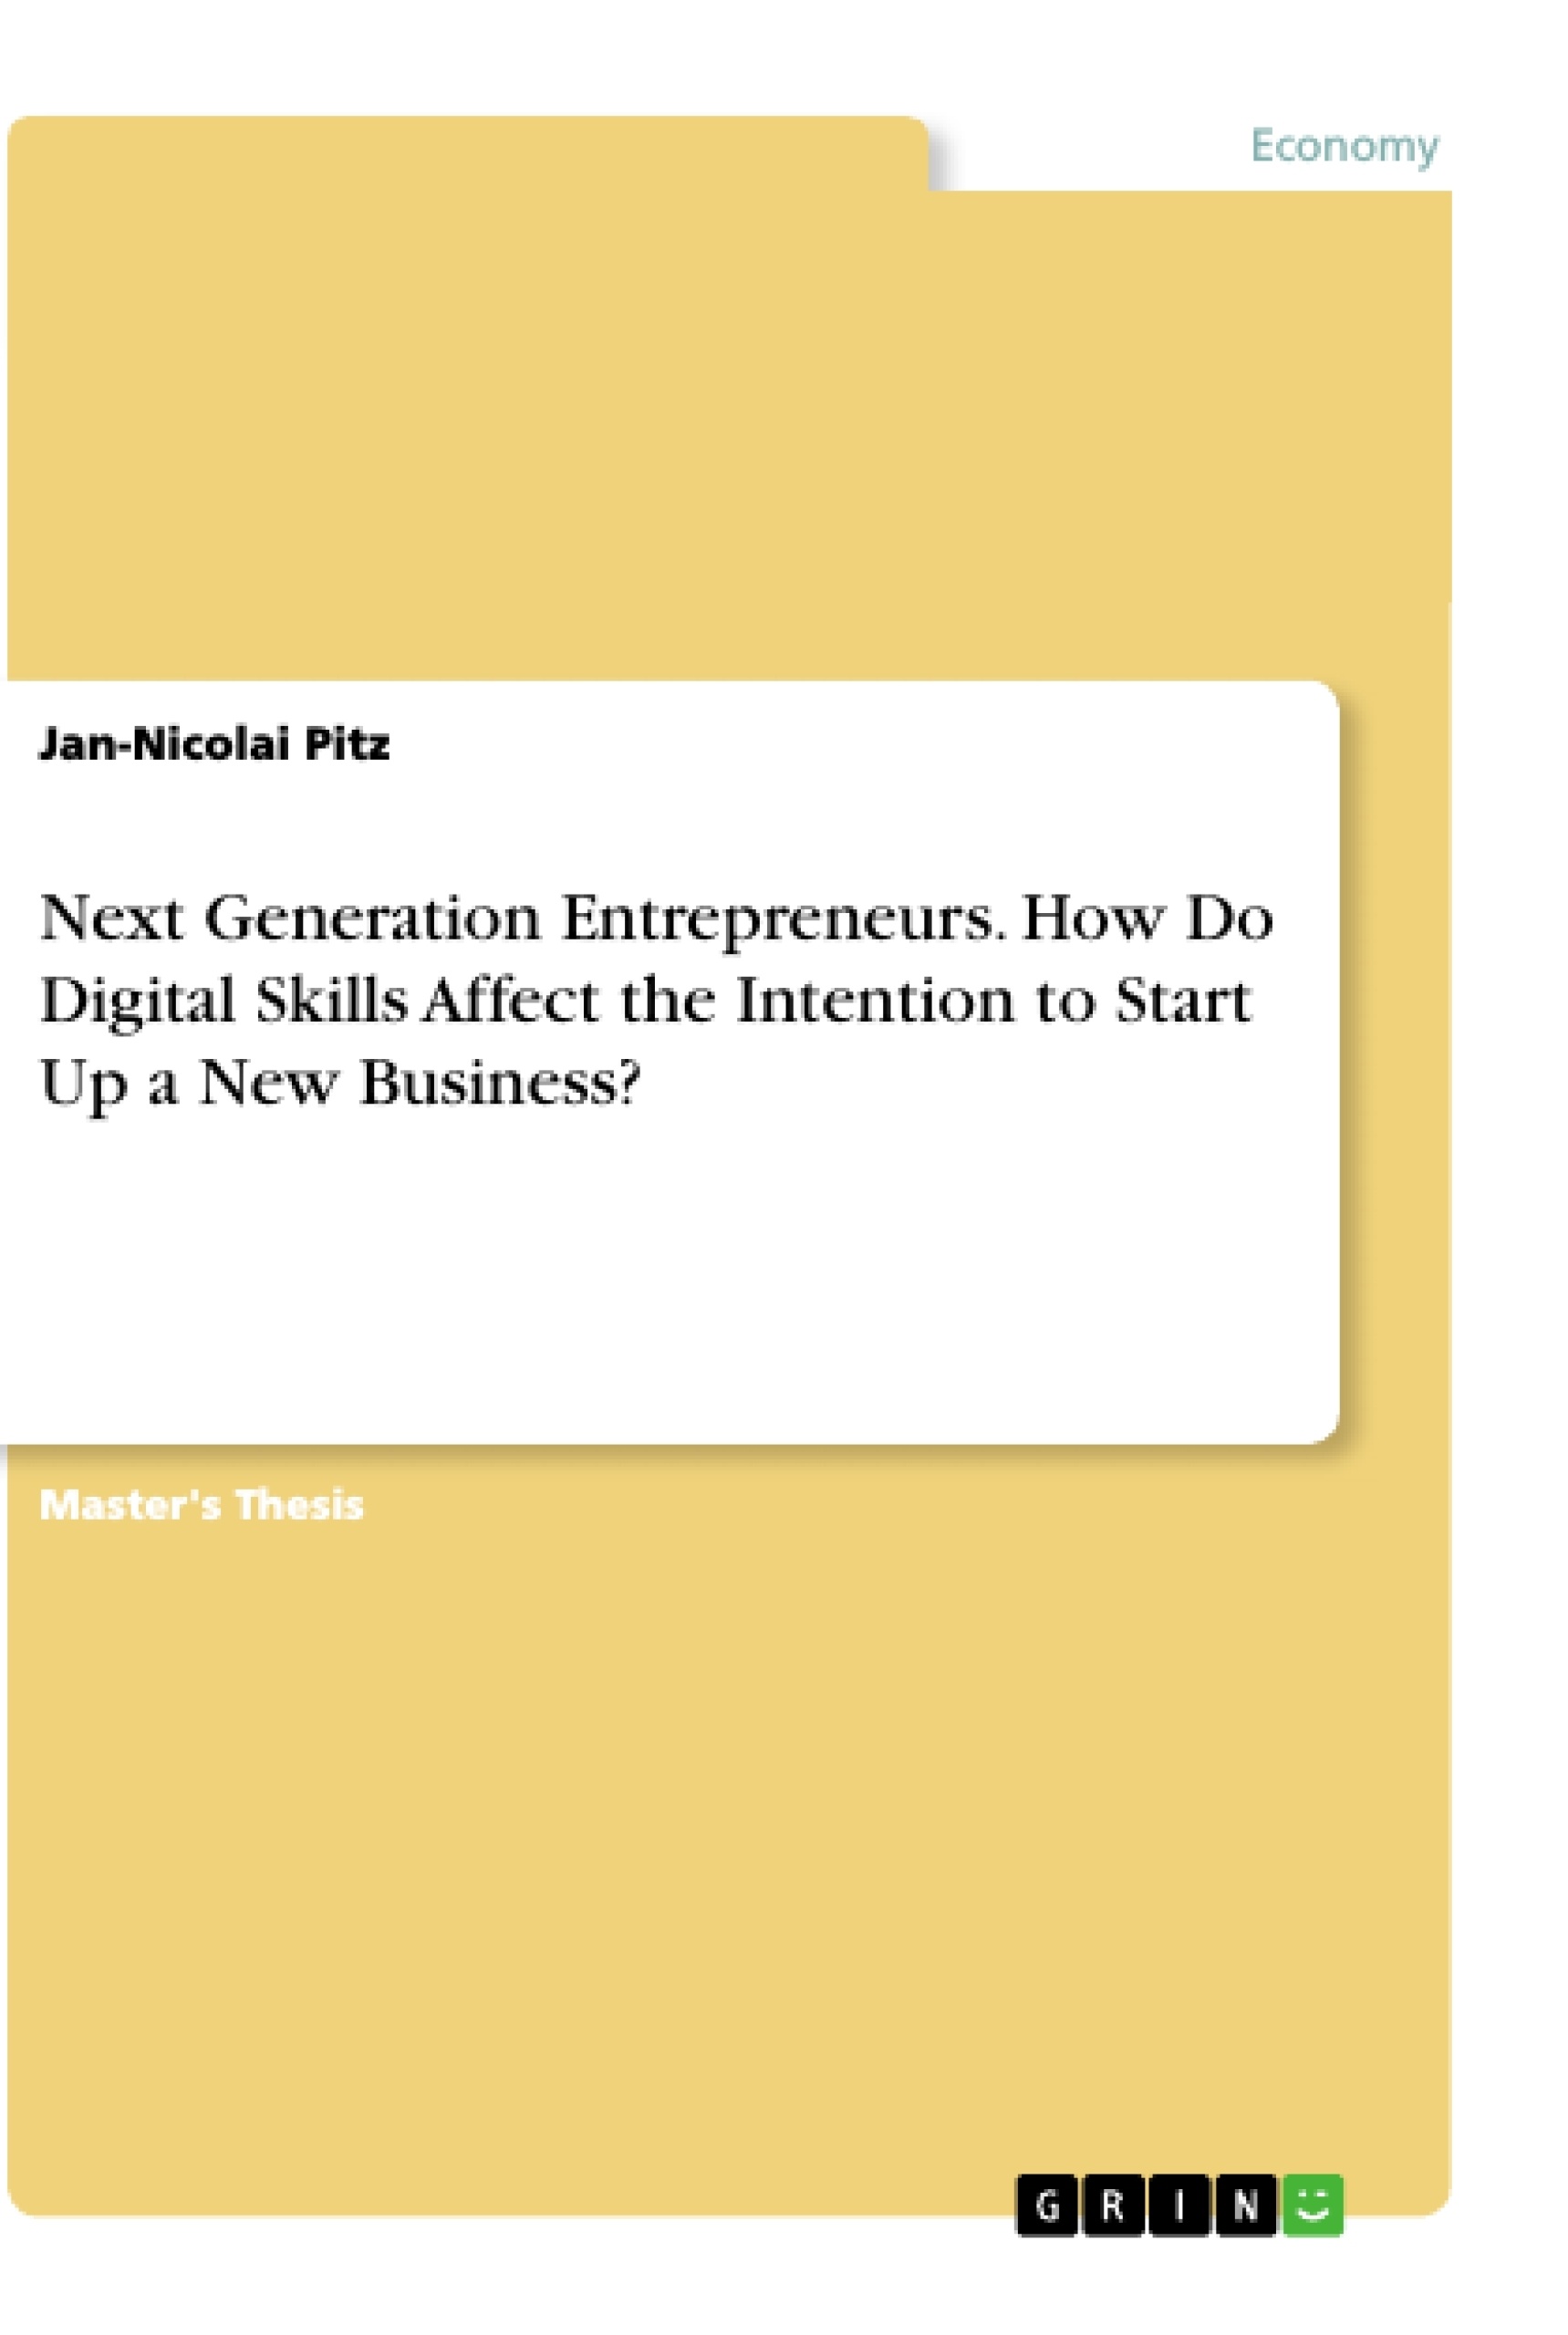 Título: Next Generation Entrepreneurs. How Do Digital Skills Affect the Intention to Start Up a New Business?